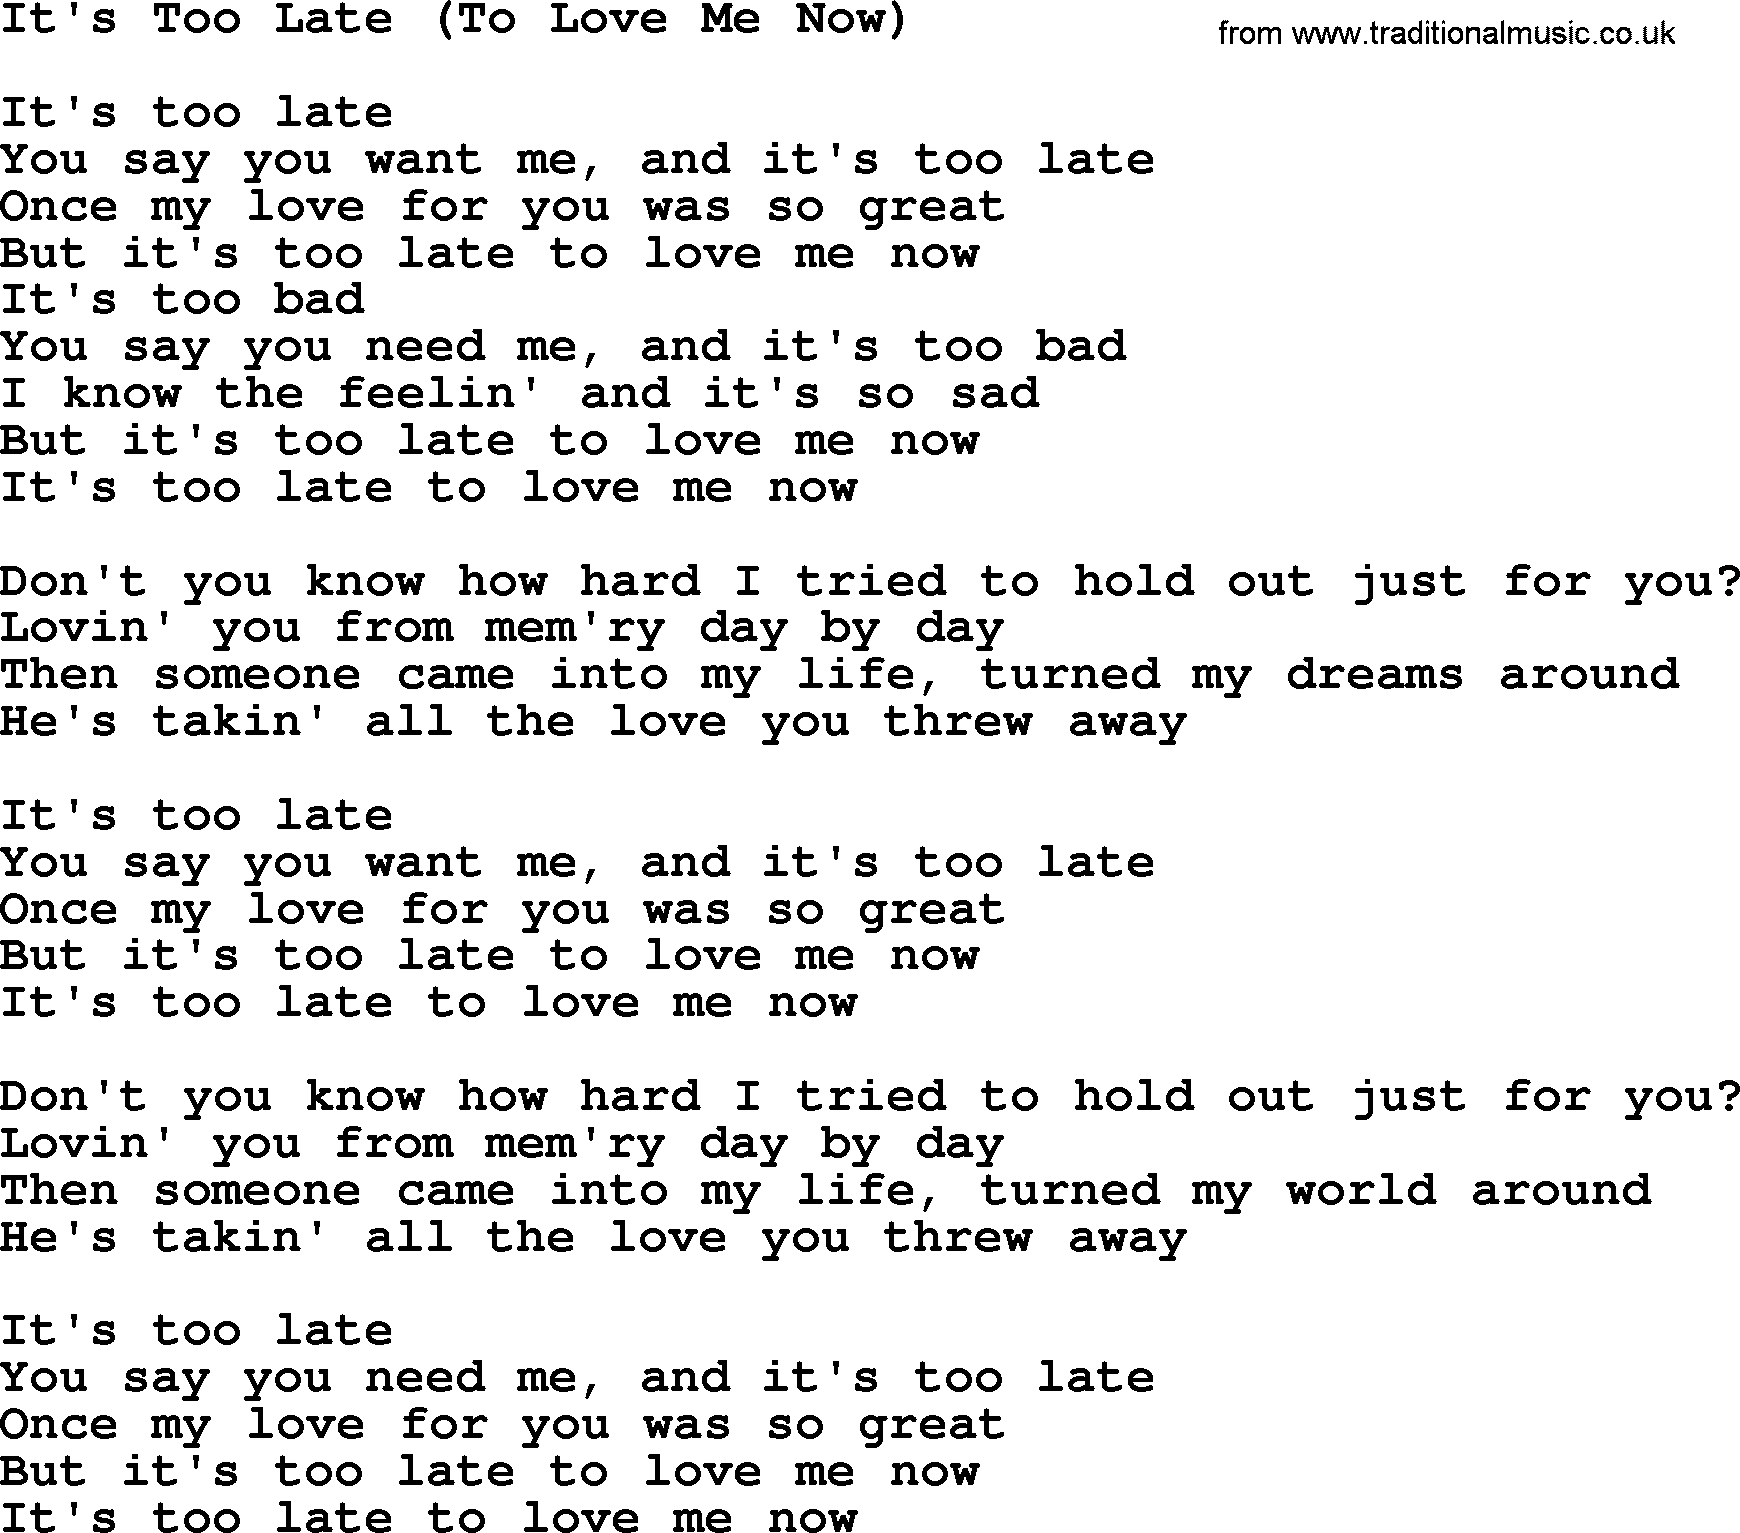 Dolly Parton song It's Too Late (To Love Me Now).txt lyrics